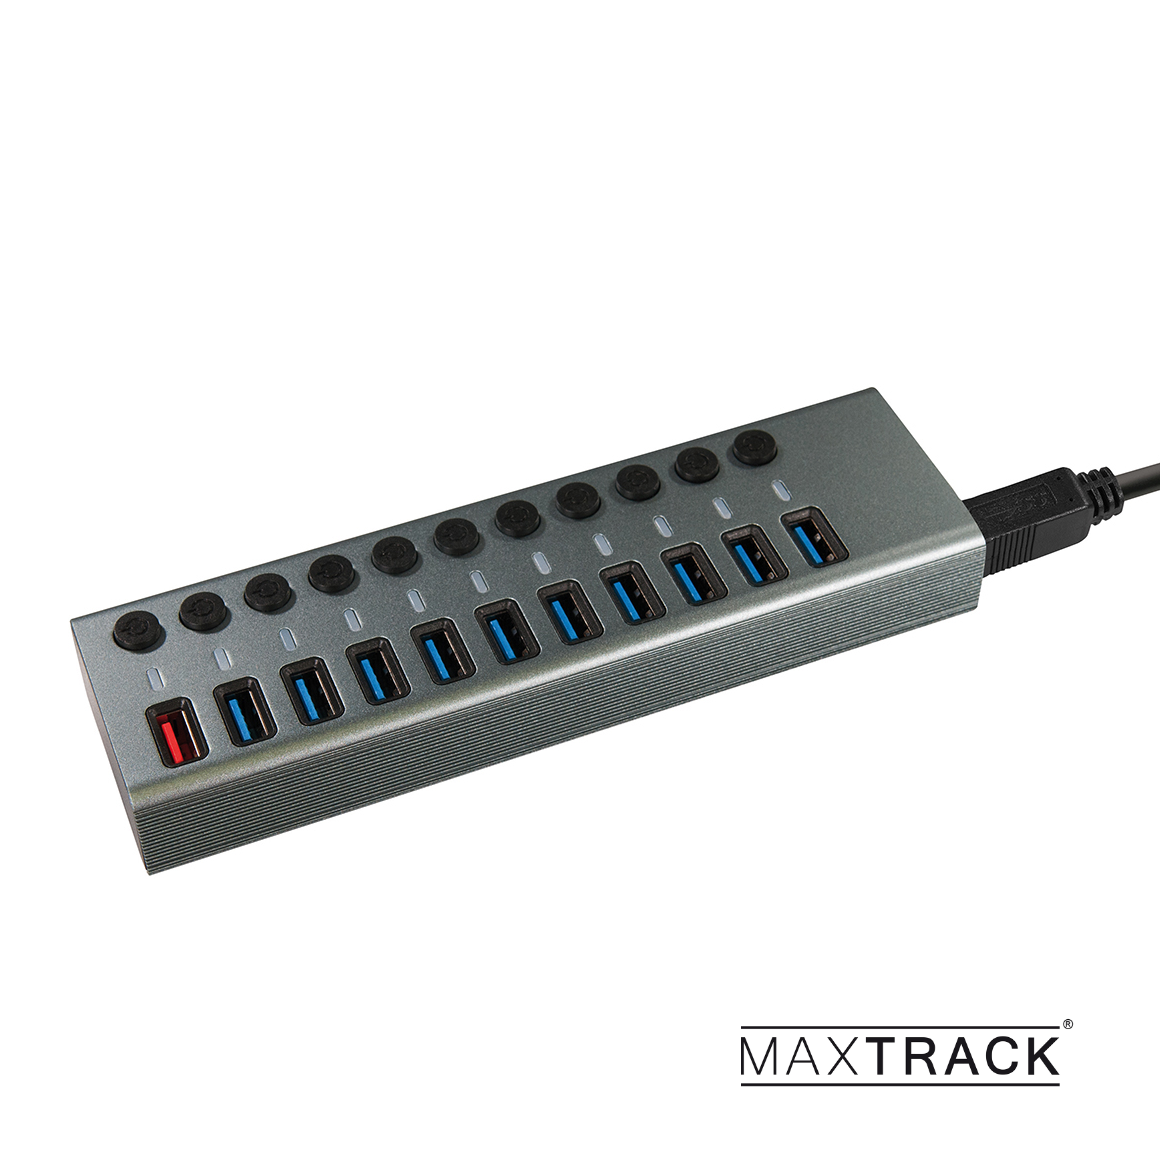 USB 3.0 HUB with 11 ports metal body with power supply